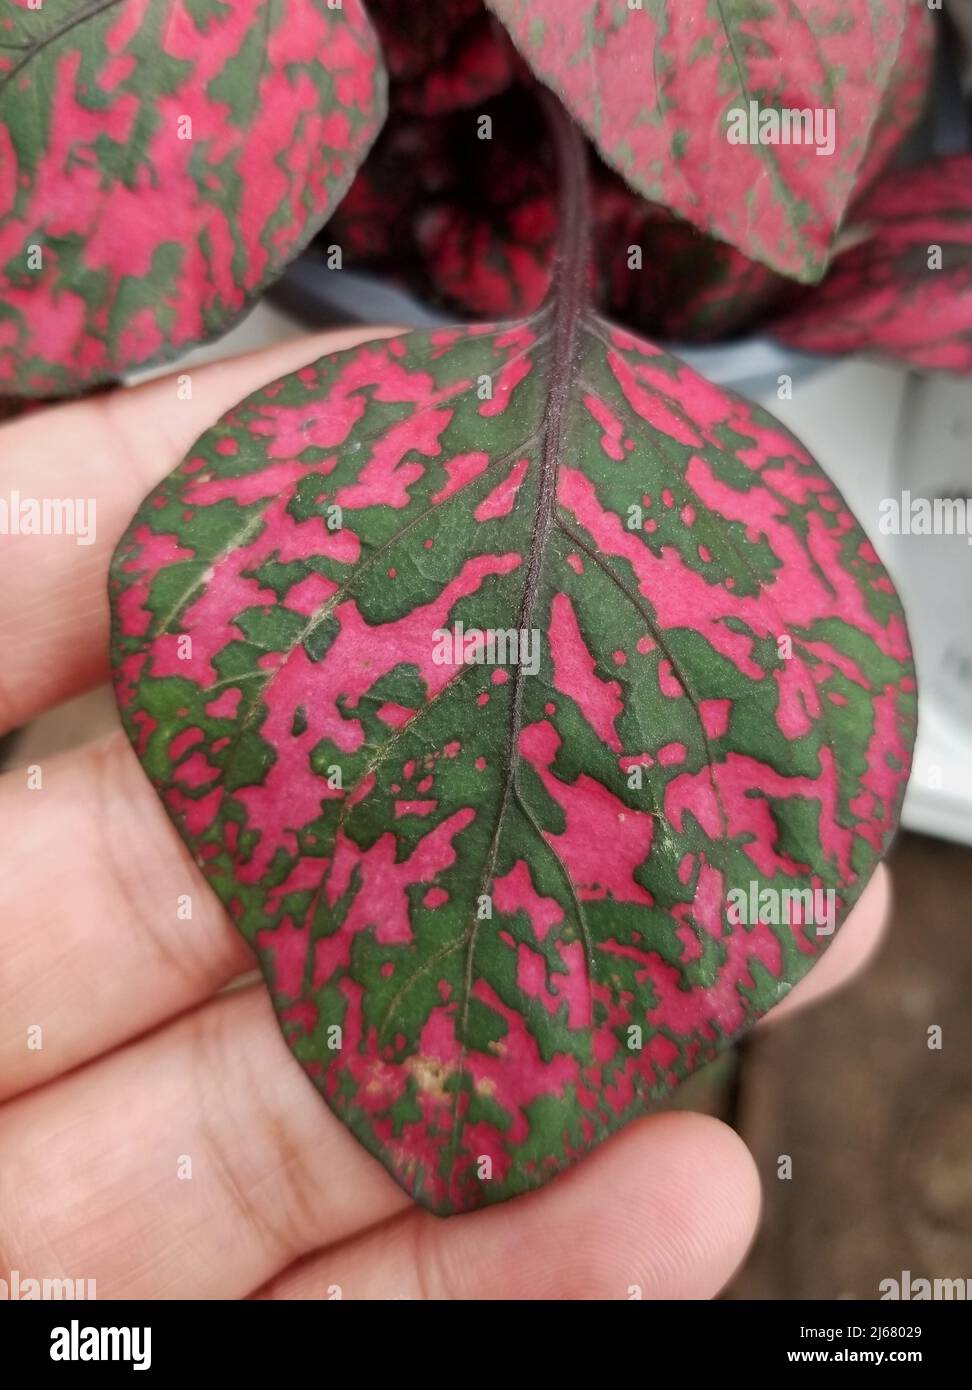 Dark green and bright pink leaf of Hypoestes Phyllostachya Stock Photo